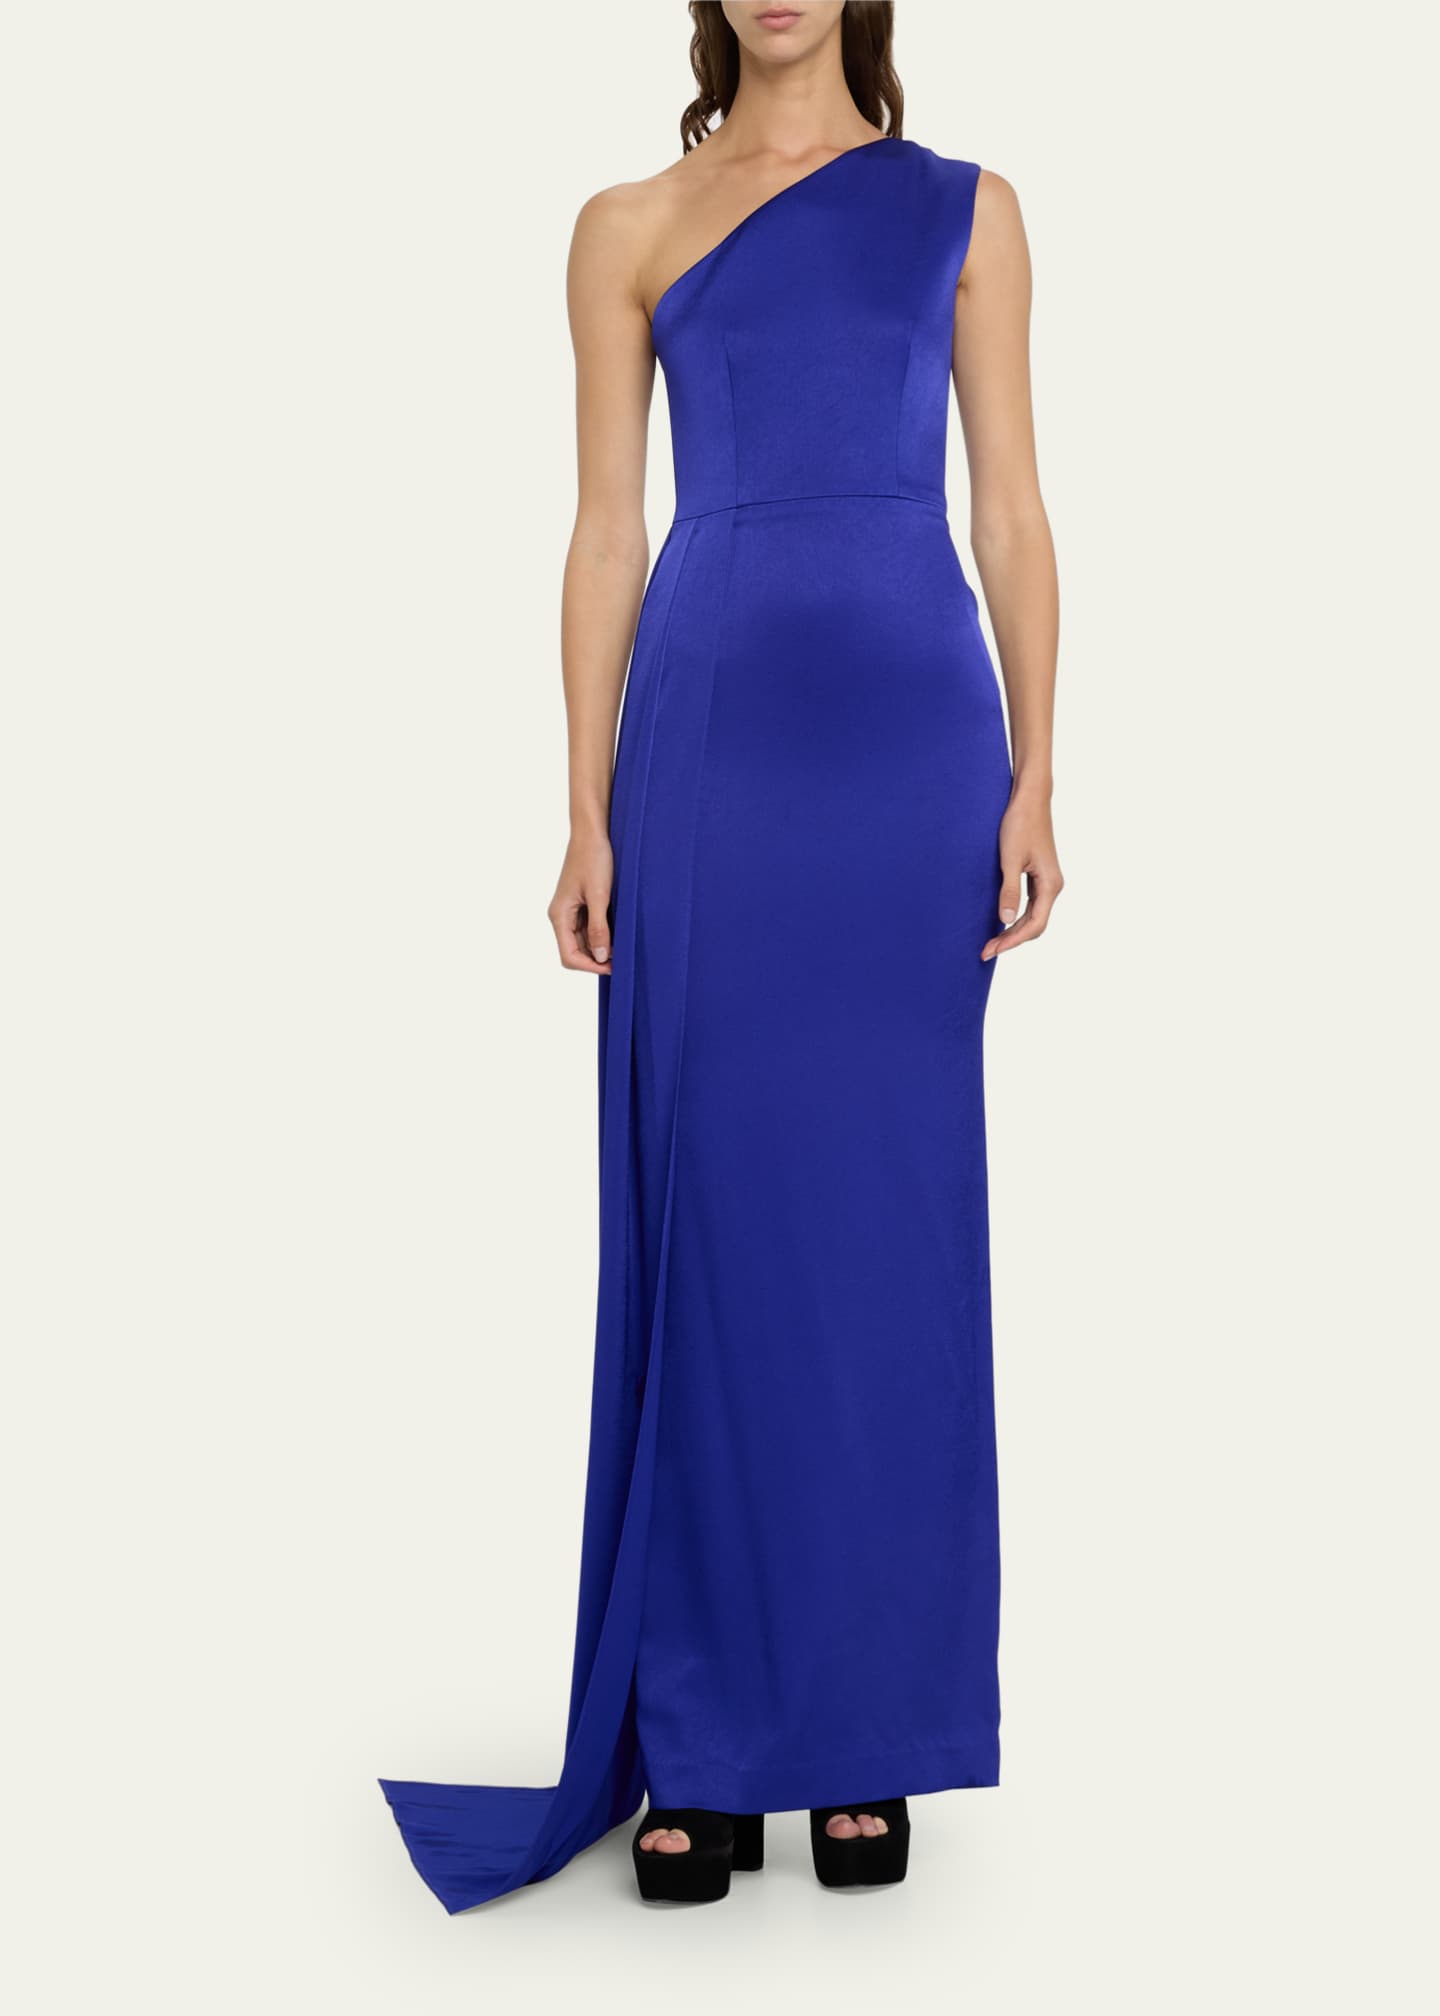 Alex Perry Satin Crepe One-Shoulder Column Gown with Sash - Bergdorf ...